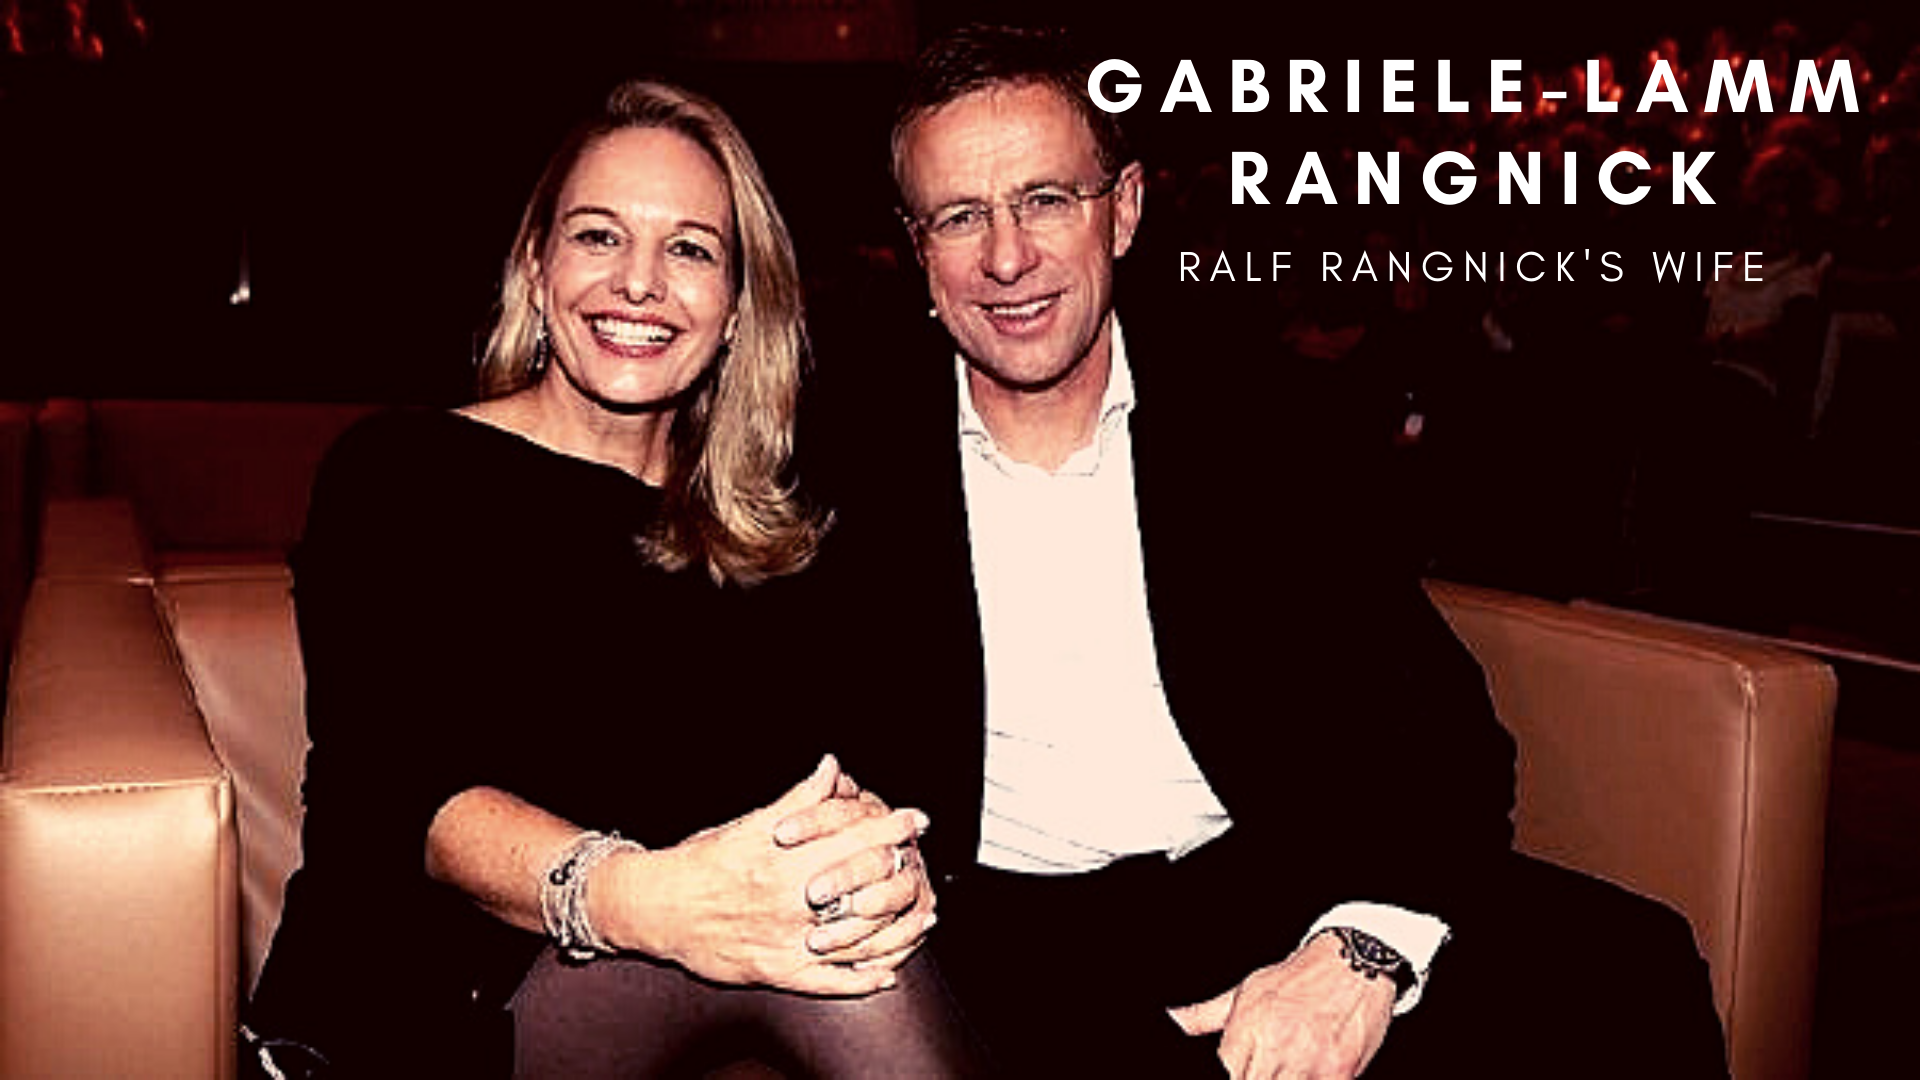 Gabriele Lamm-Rangnick – Ralf Rangnick Wife, Family, Kids, Career and Net Worth. (Original Photo by Andreas Rentz via Getty Images)